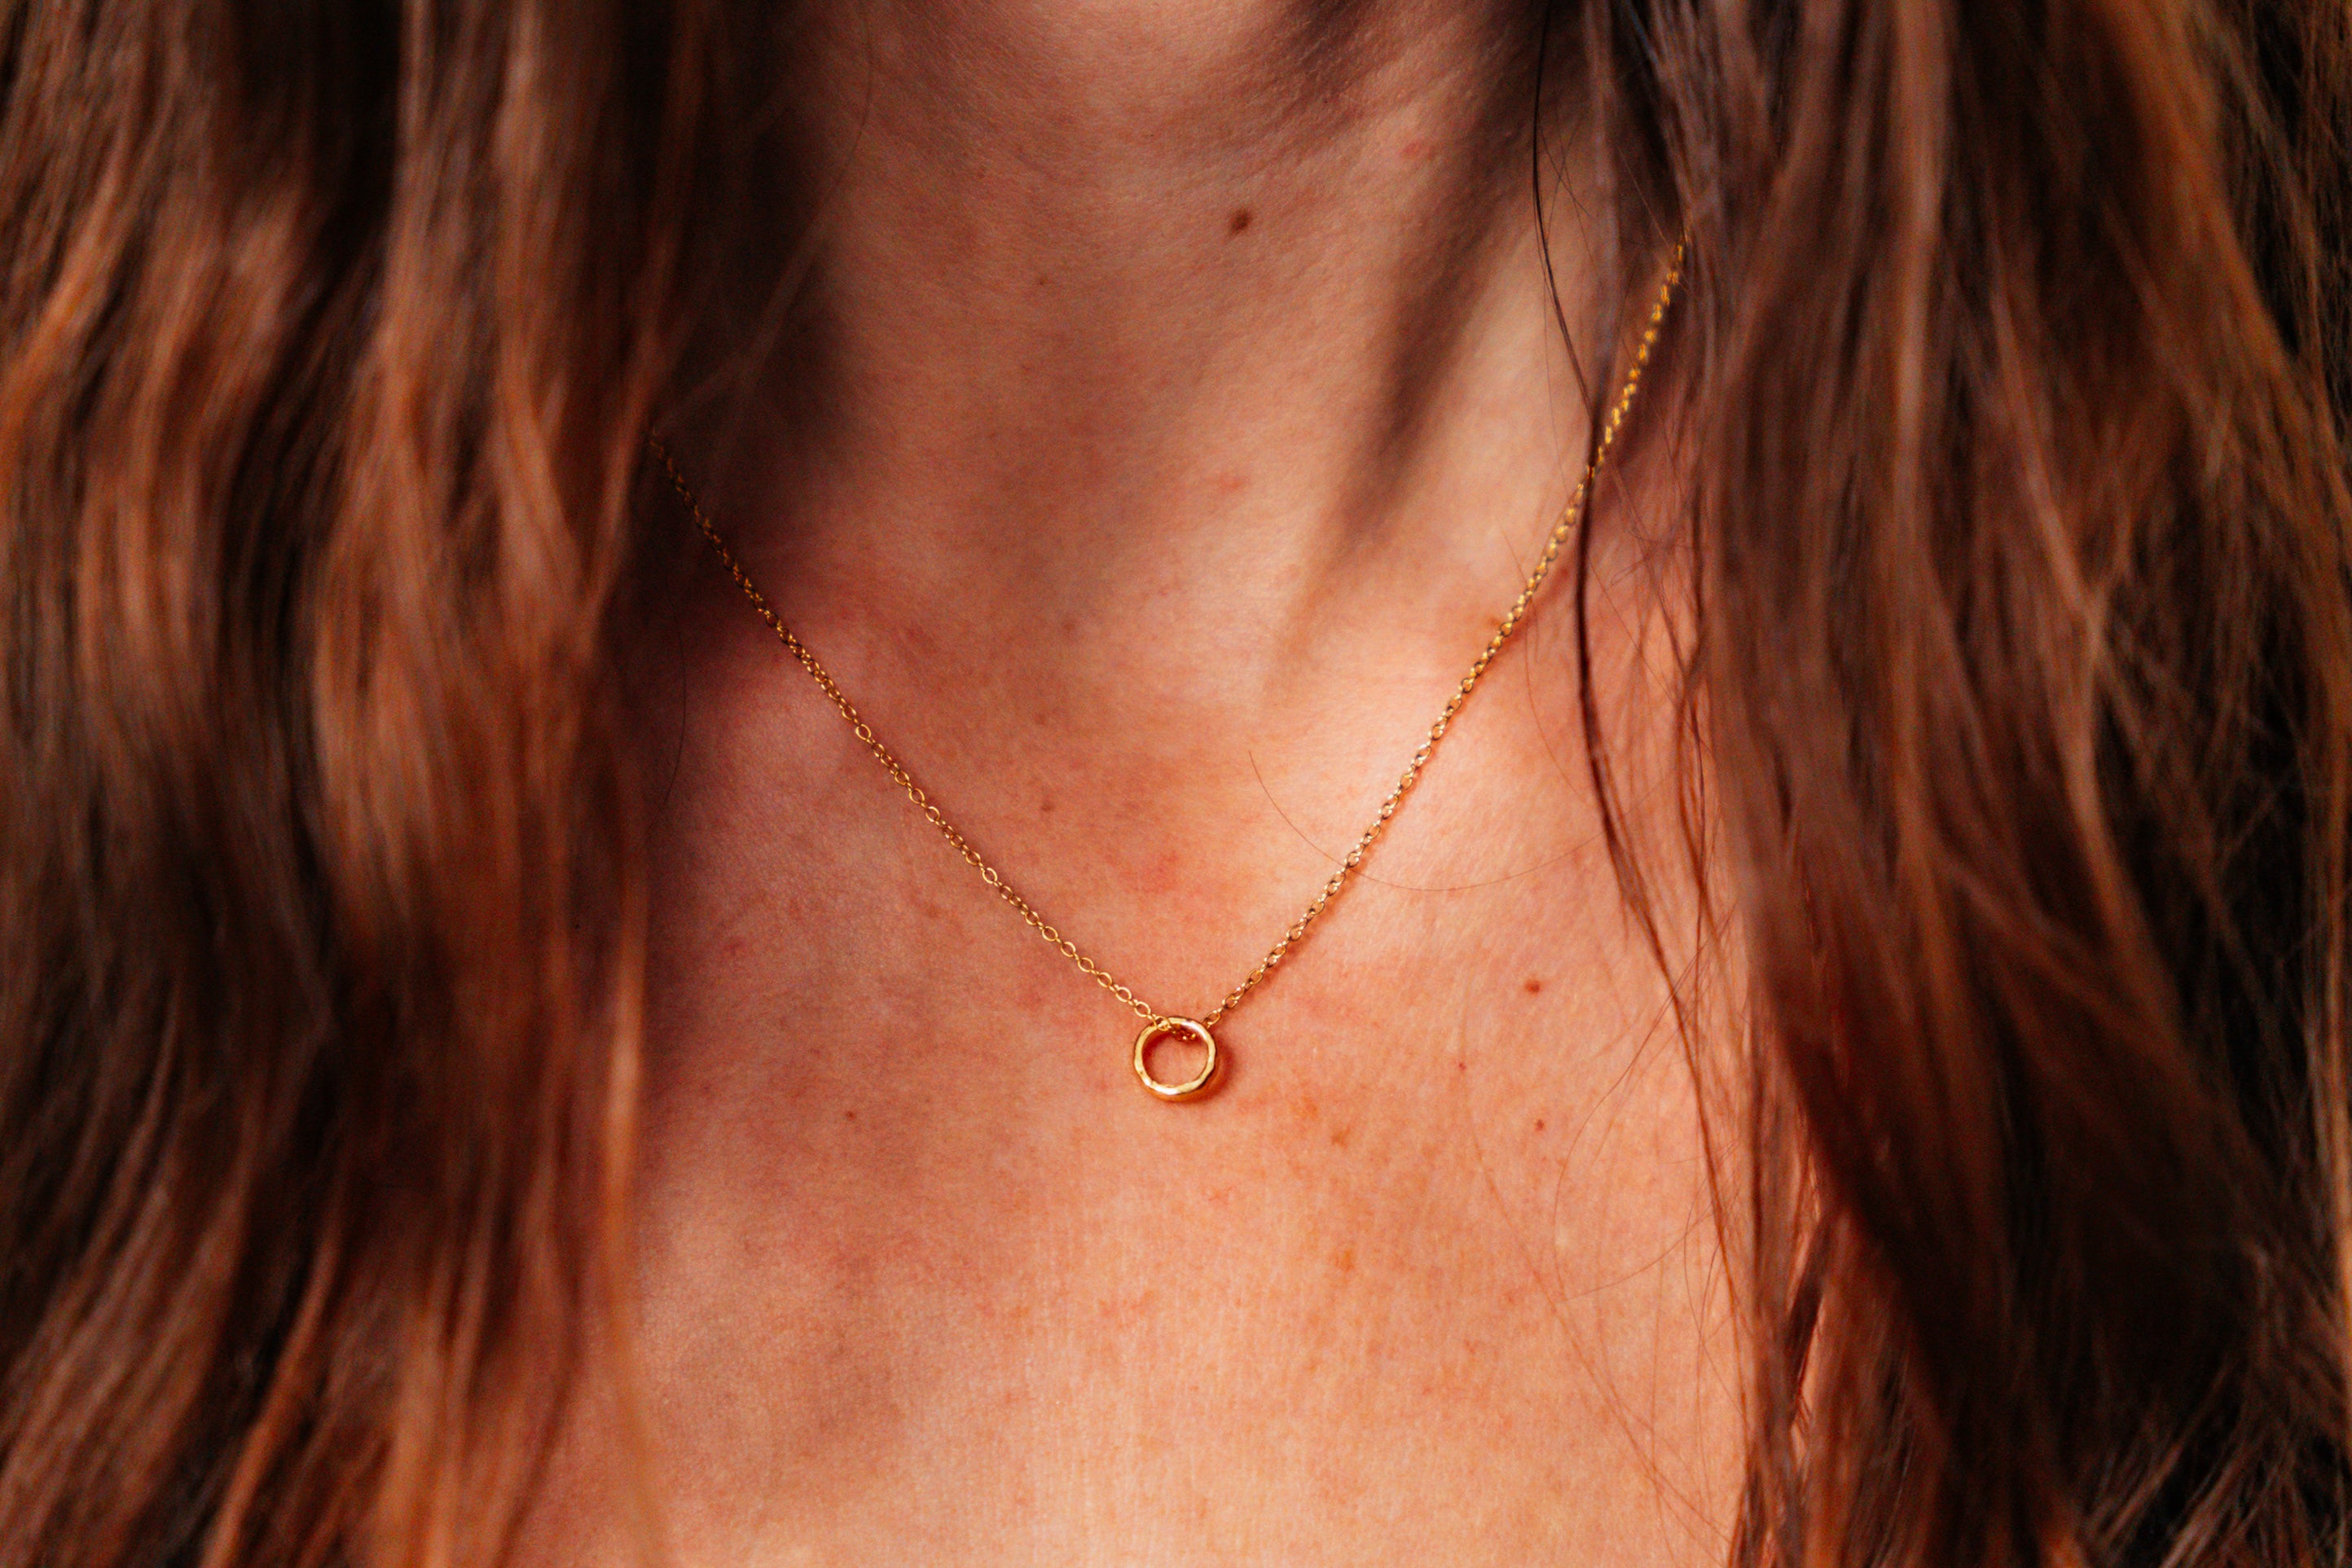 Gold Open Circle Necklace